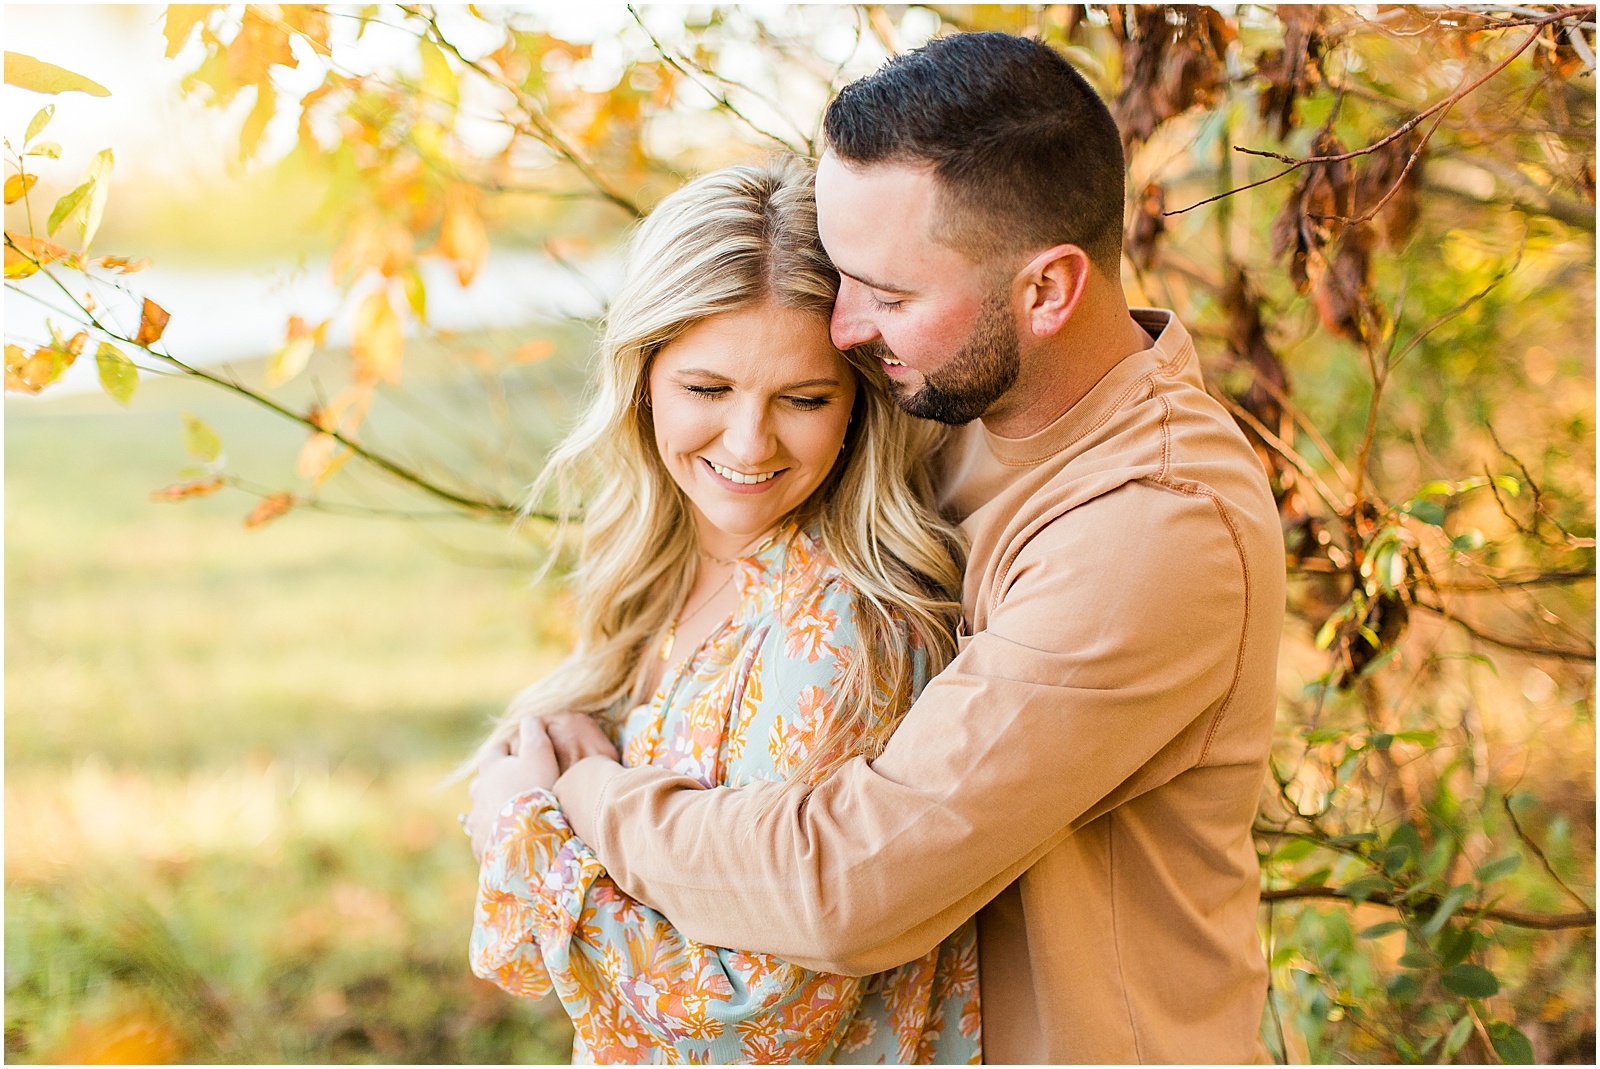 A Southern Indiana Engagement Session | Charleston and Erin | Bret and Brandie Photography011.jpg